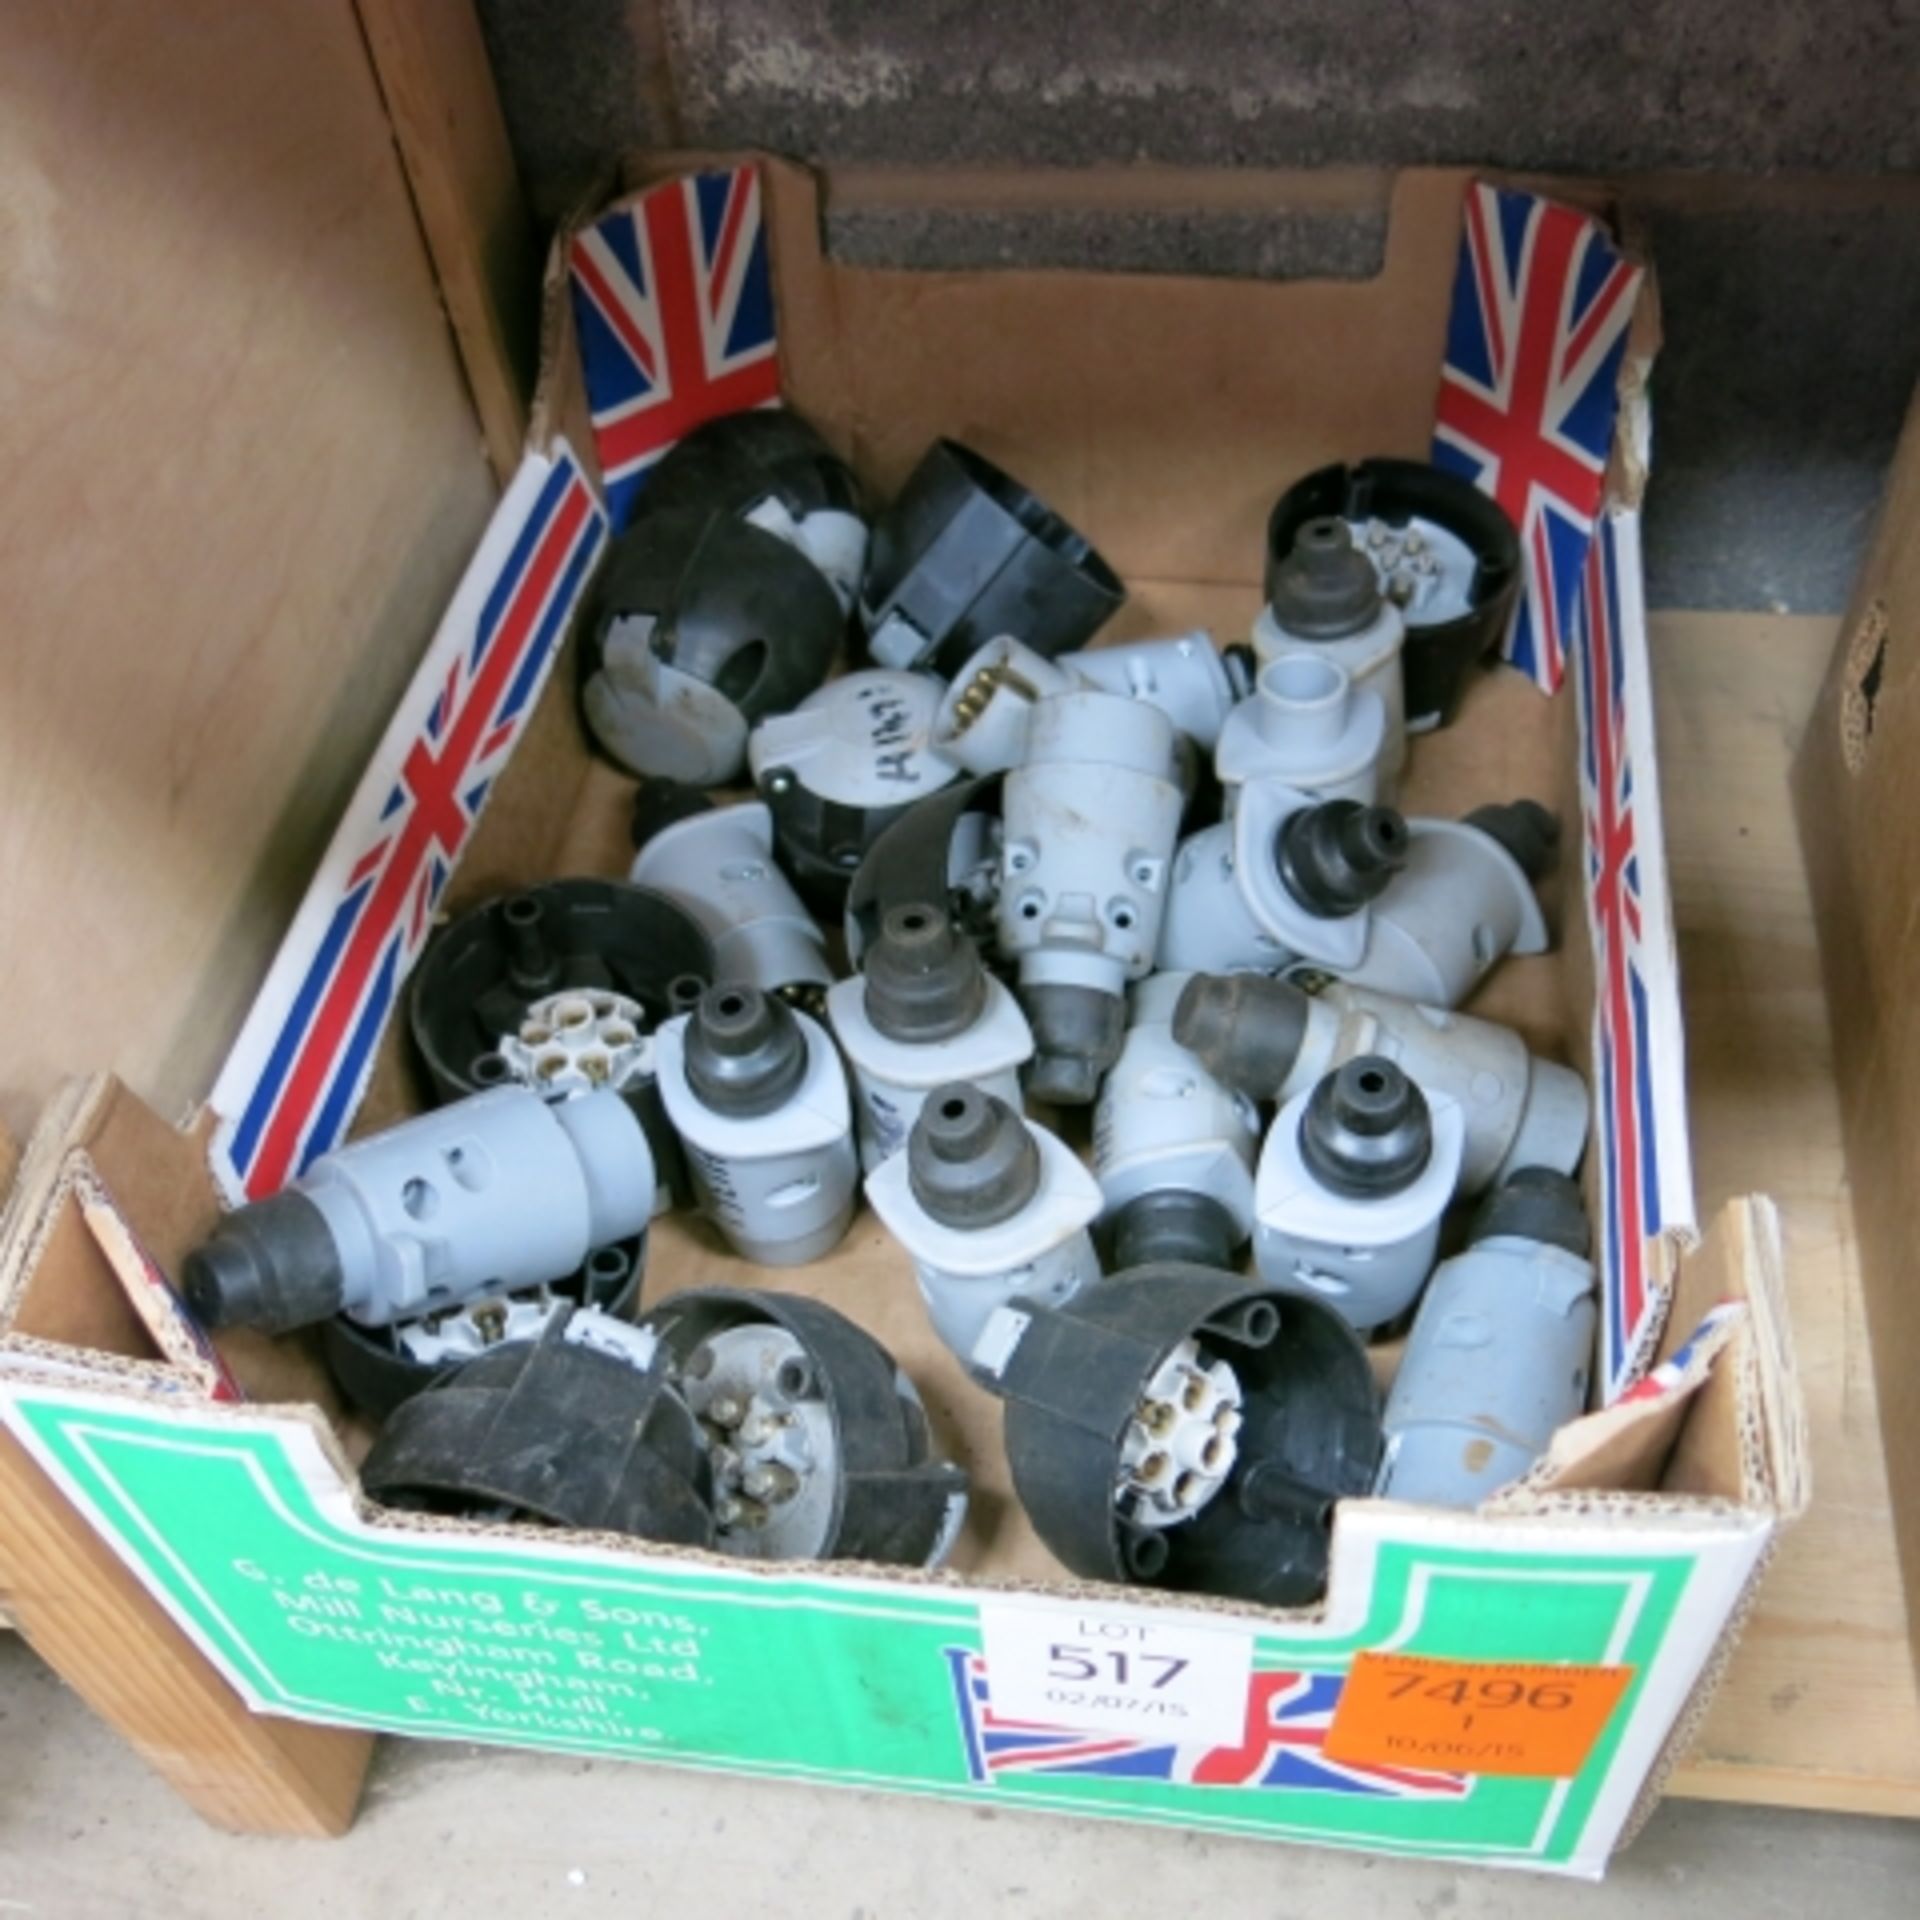 A box to contain a qty of trailer / connector fittings